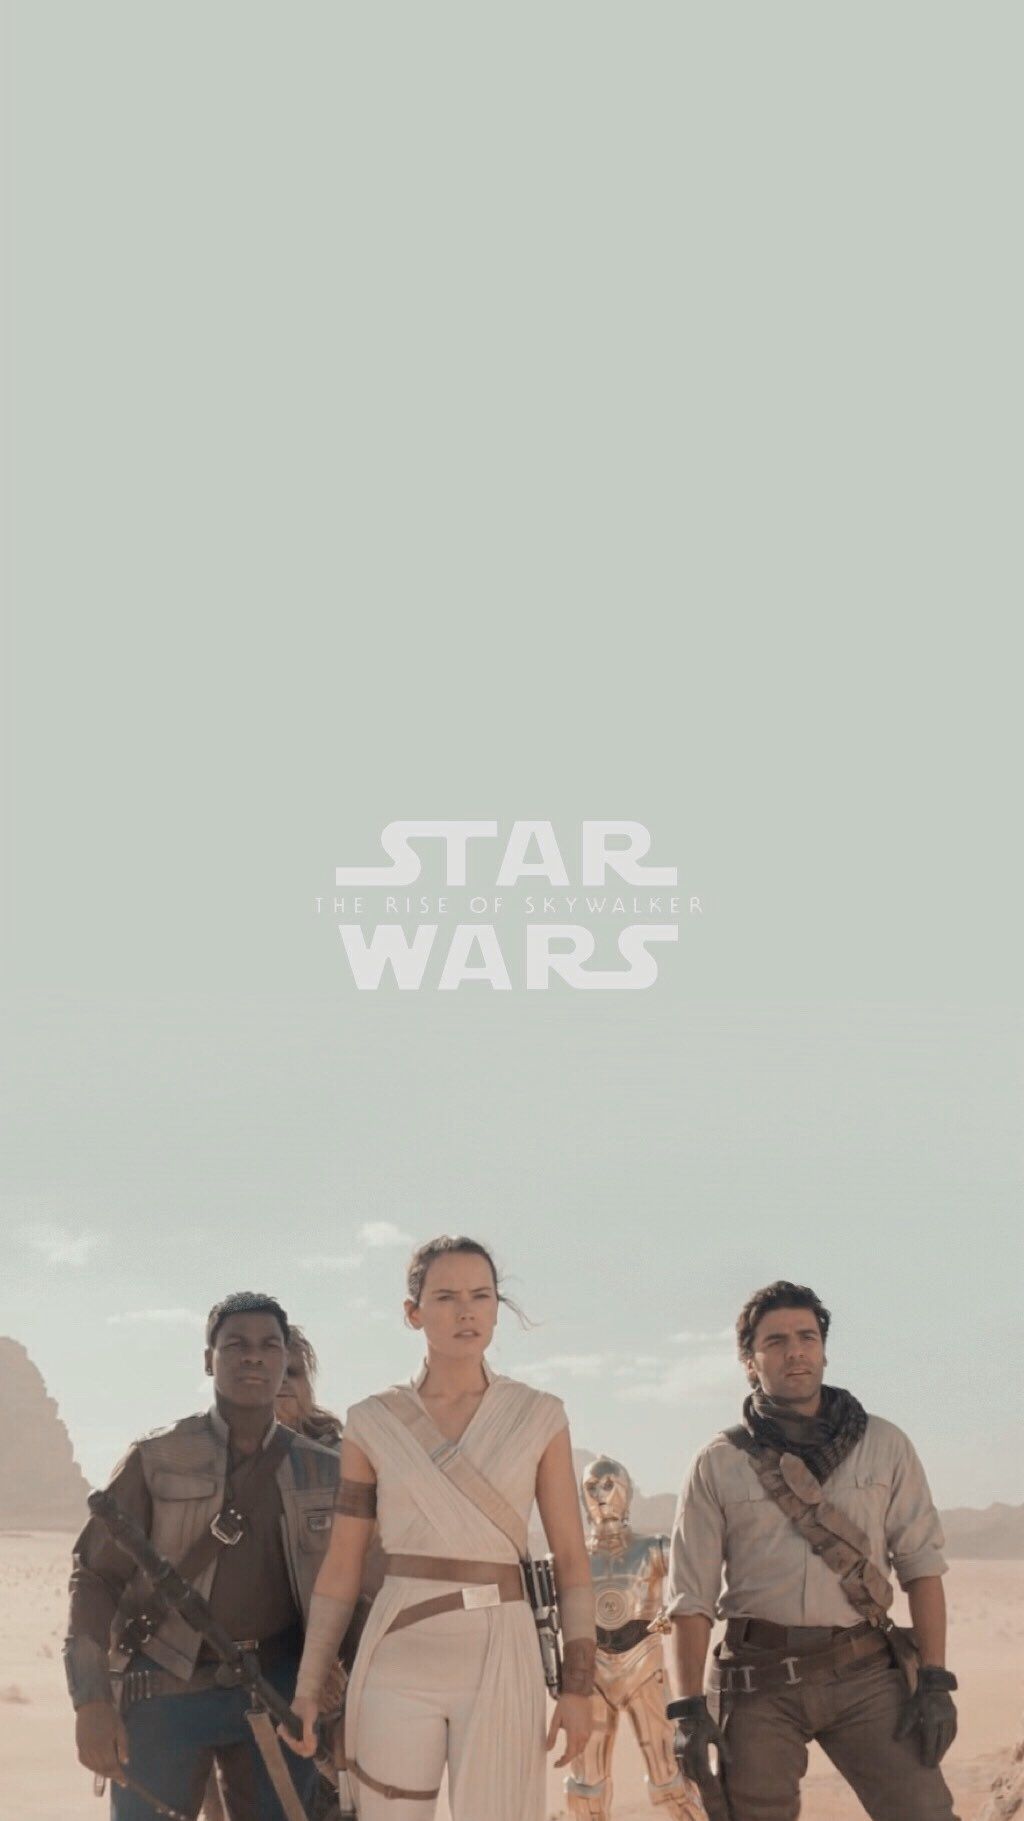 A poster for the movie star wars - Star Wars